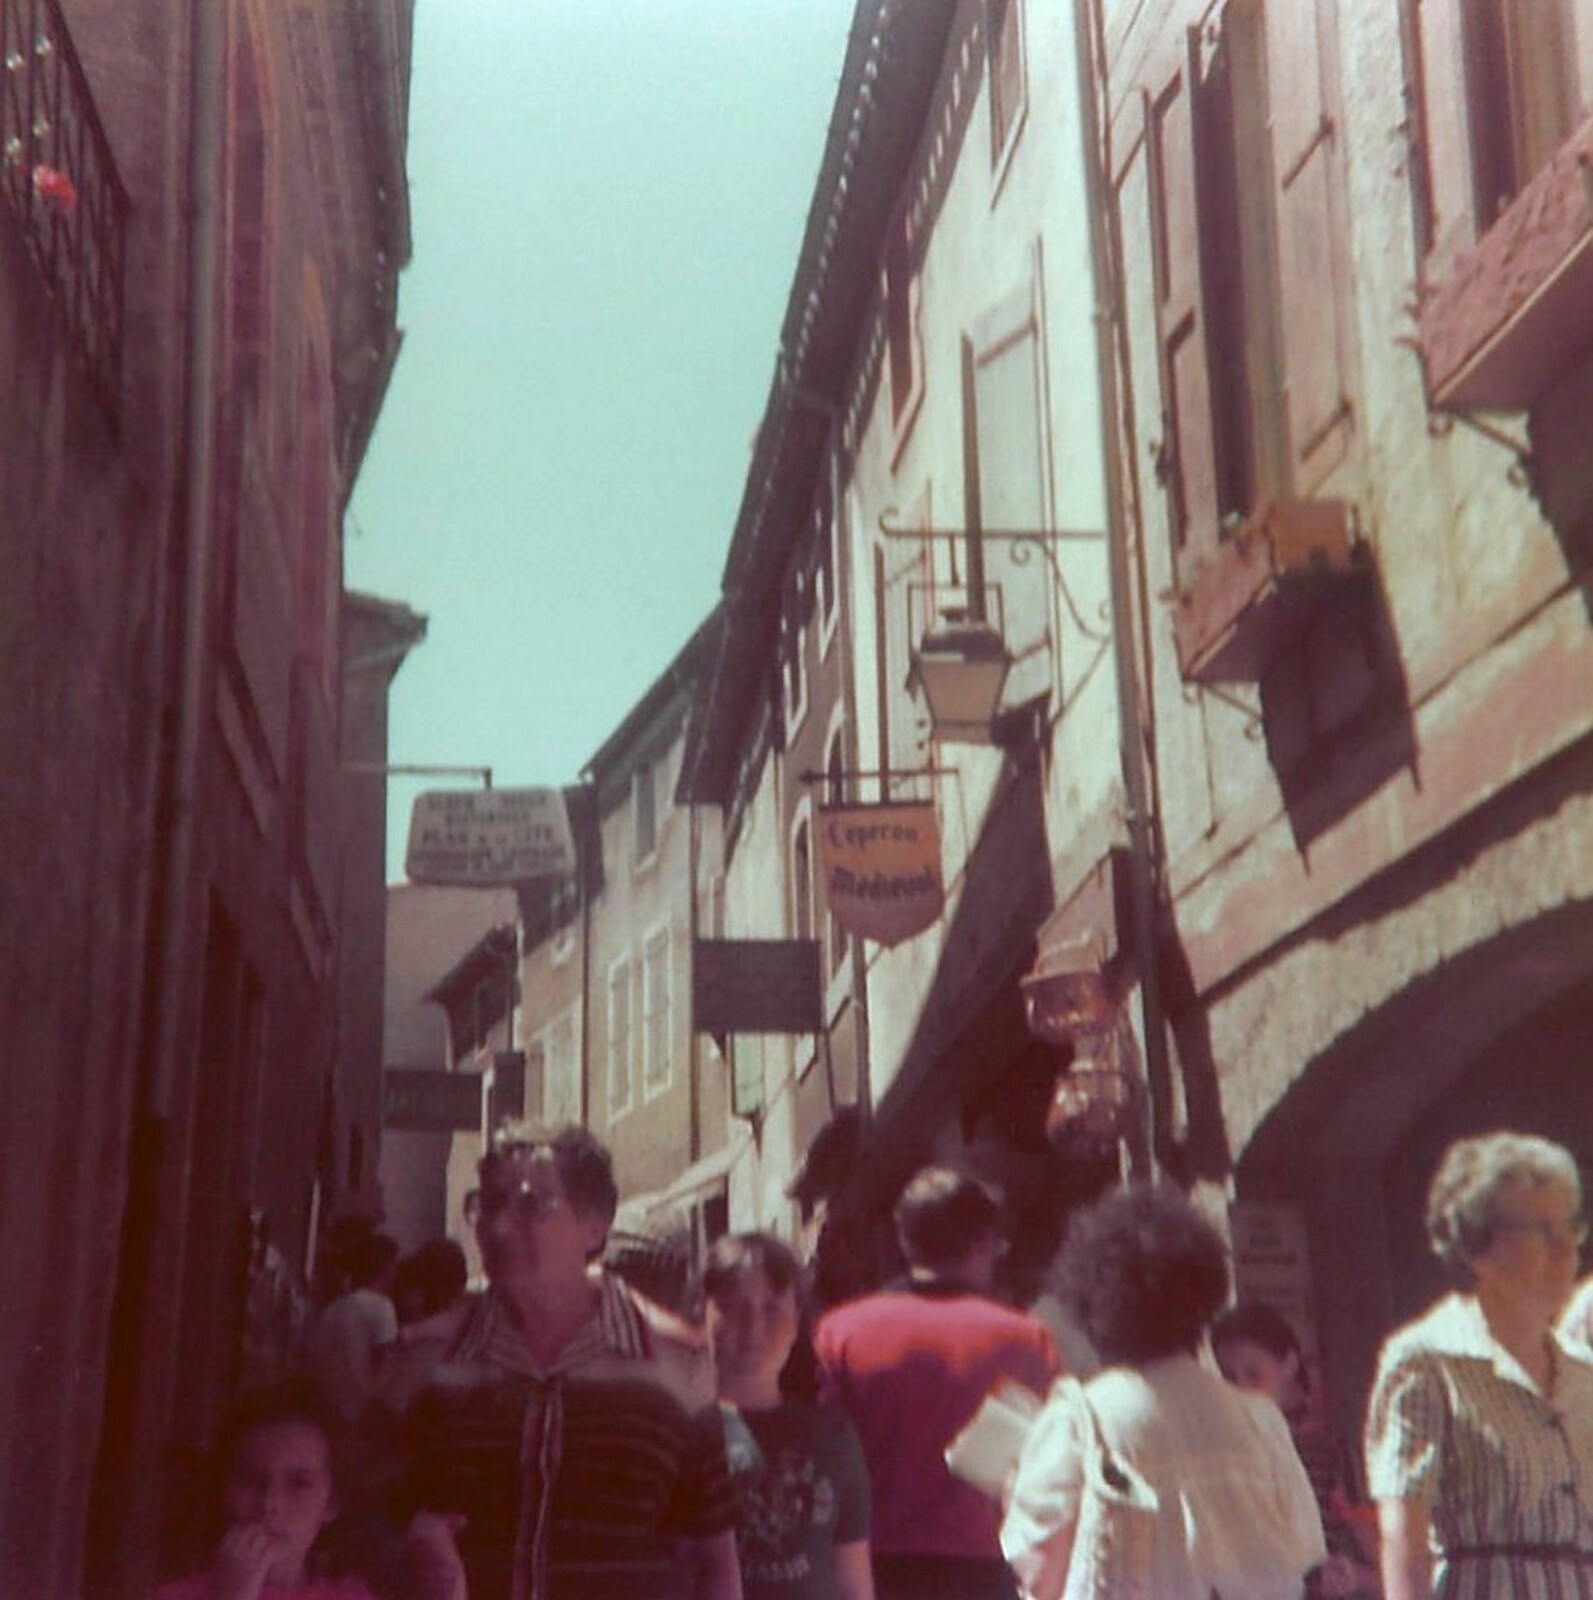 The crowded streets of Carcassonne from A Trip to Bram, Aude, France - 25th July 1980